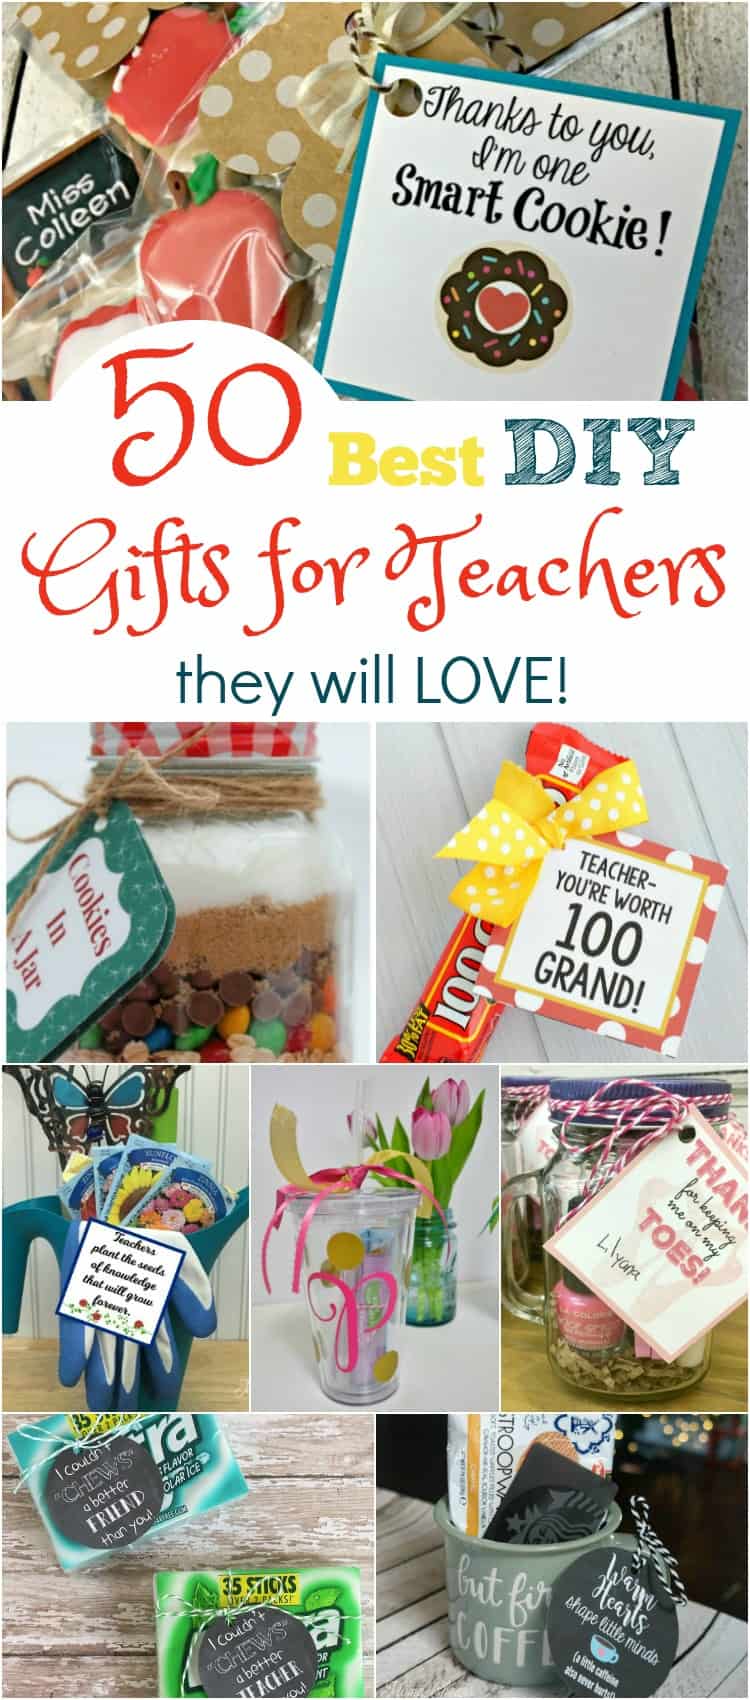 Check out these diy teachers gifts you can make from kids. Some are easy, others are homemade, or cheap. They are a perfect Christmas gift, teacher appreciation gift, end of the year gift, or birthday gift! 